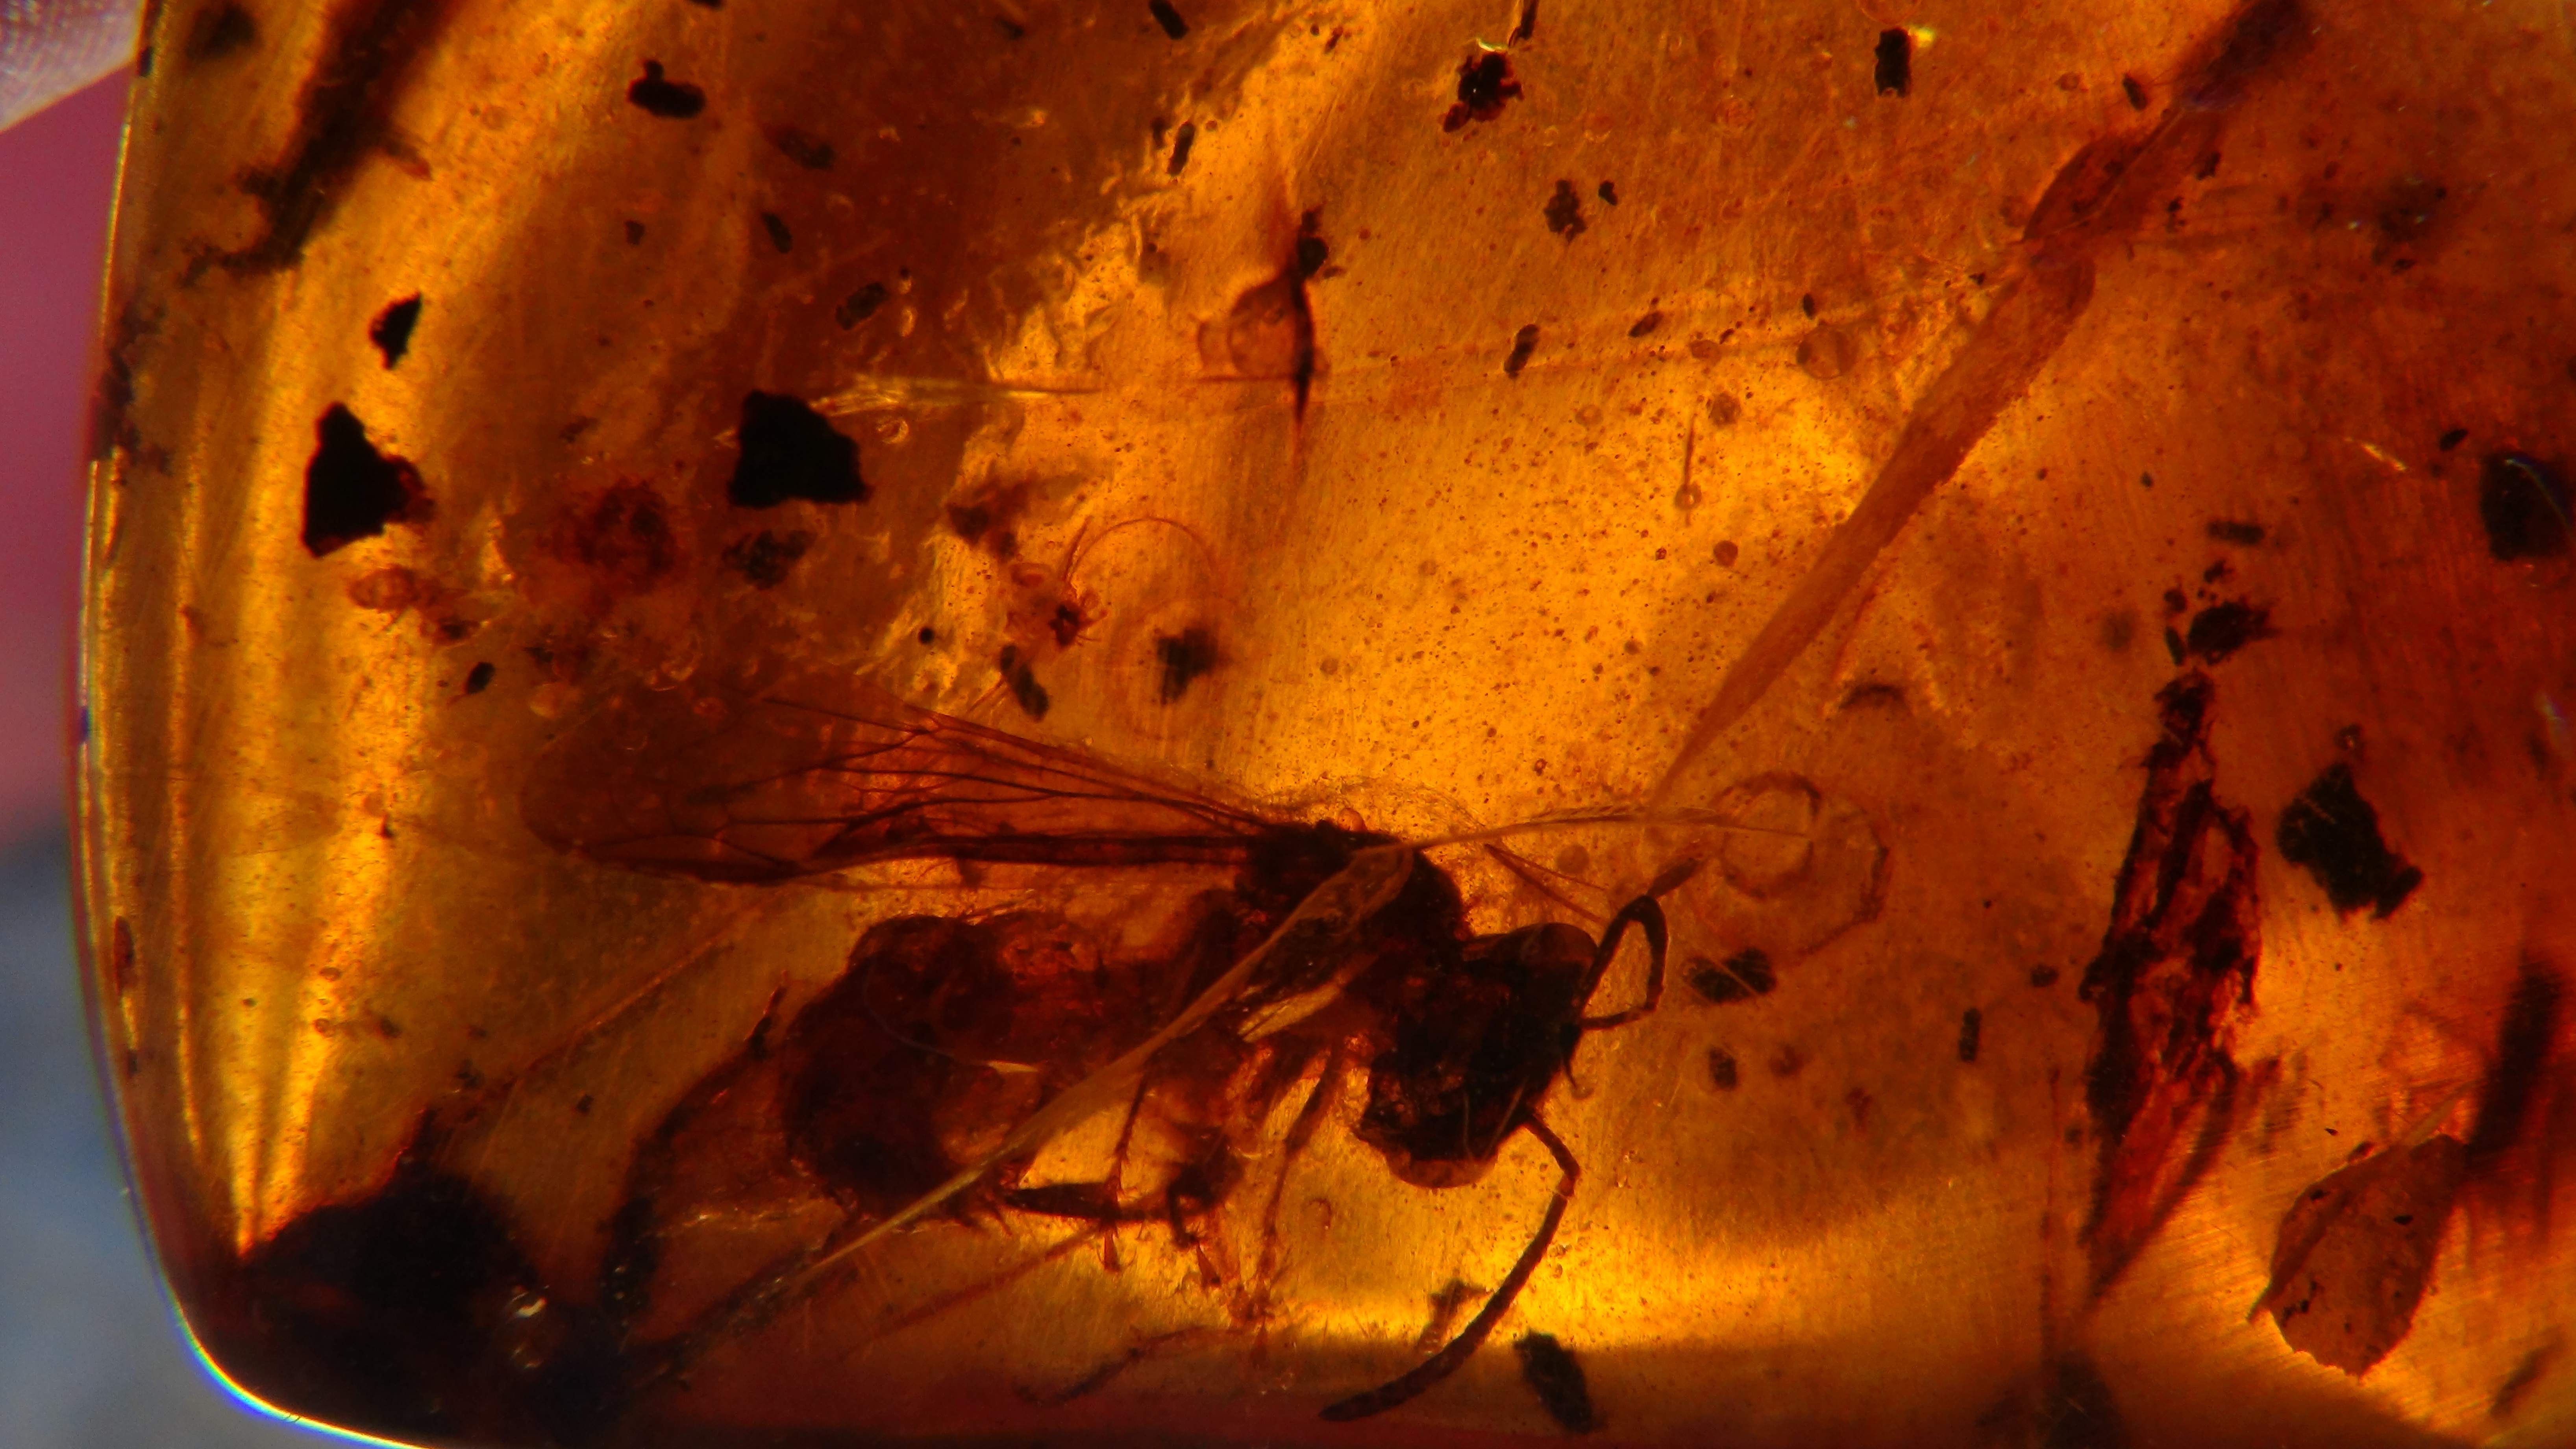 wasp in amber